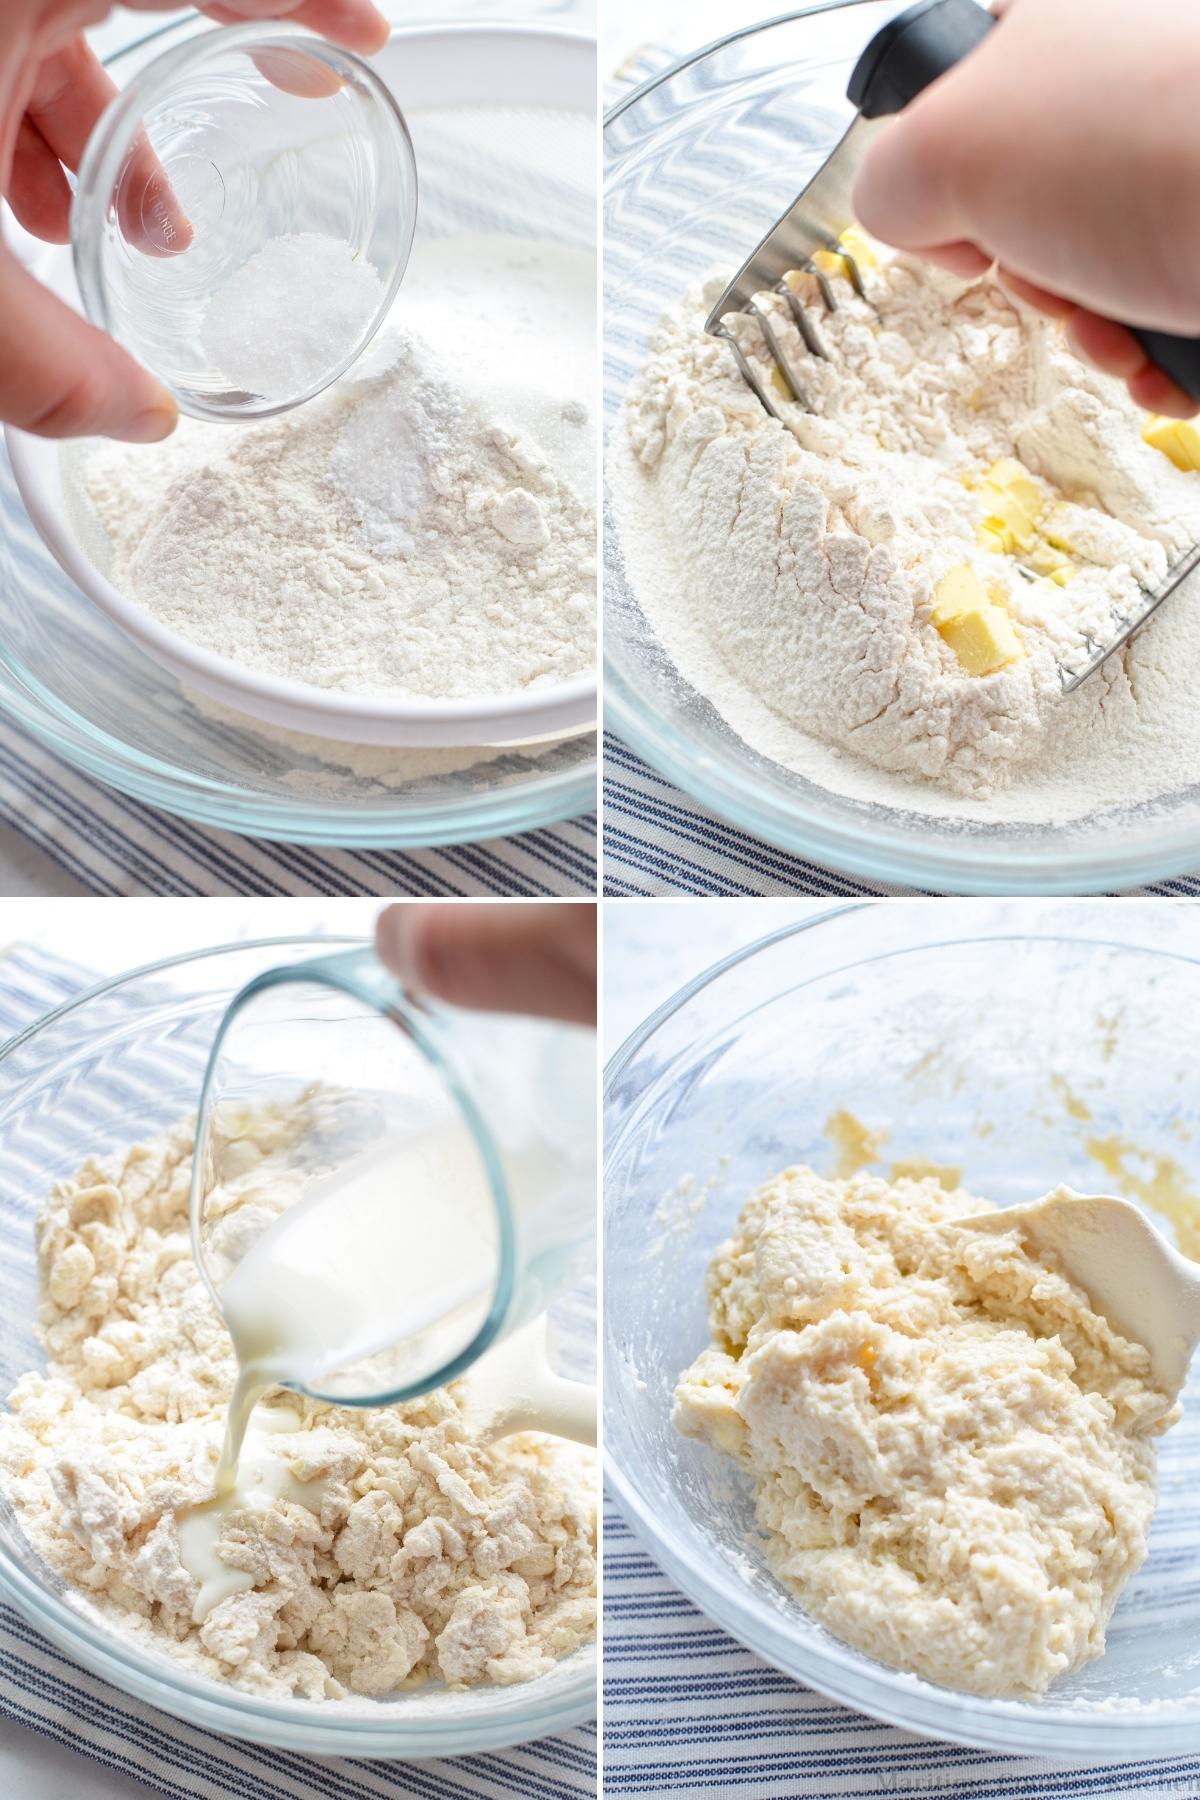 Cutting butter into a flour mixture and adding milk to make a biscuit dough.